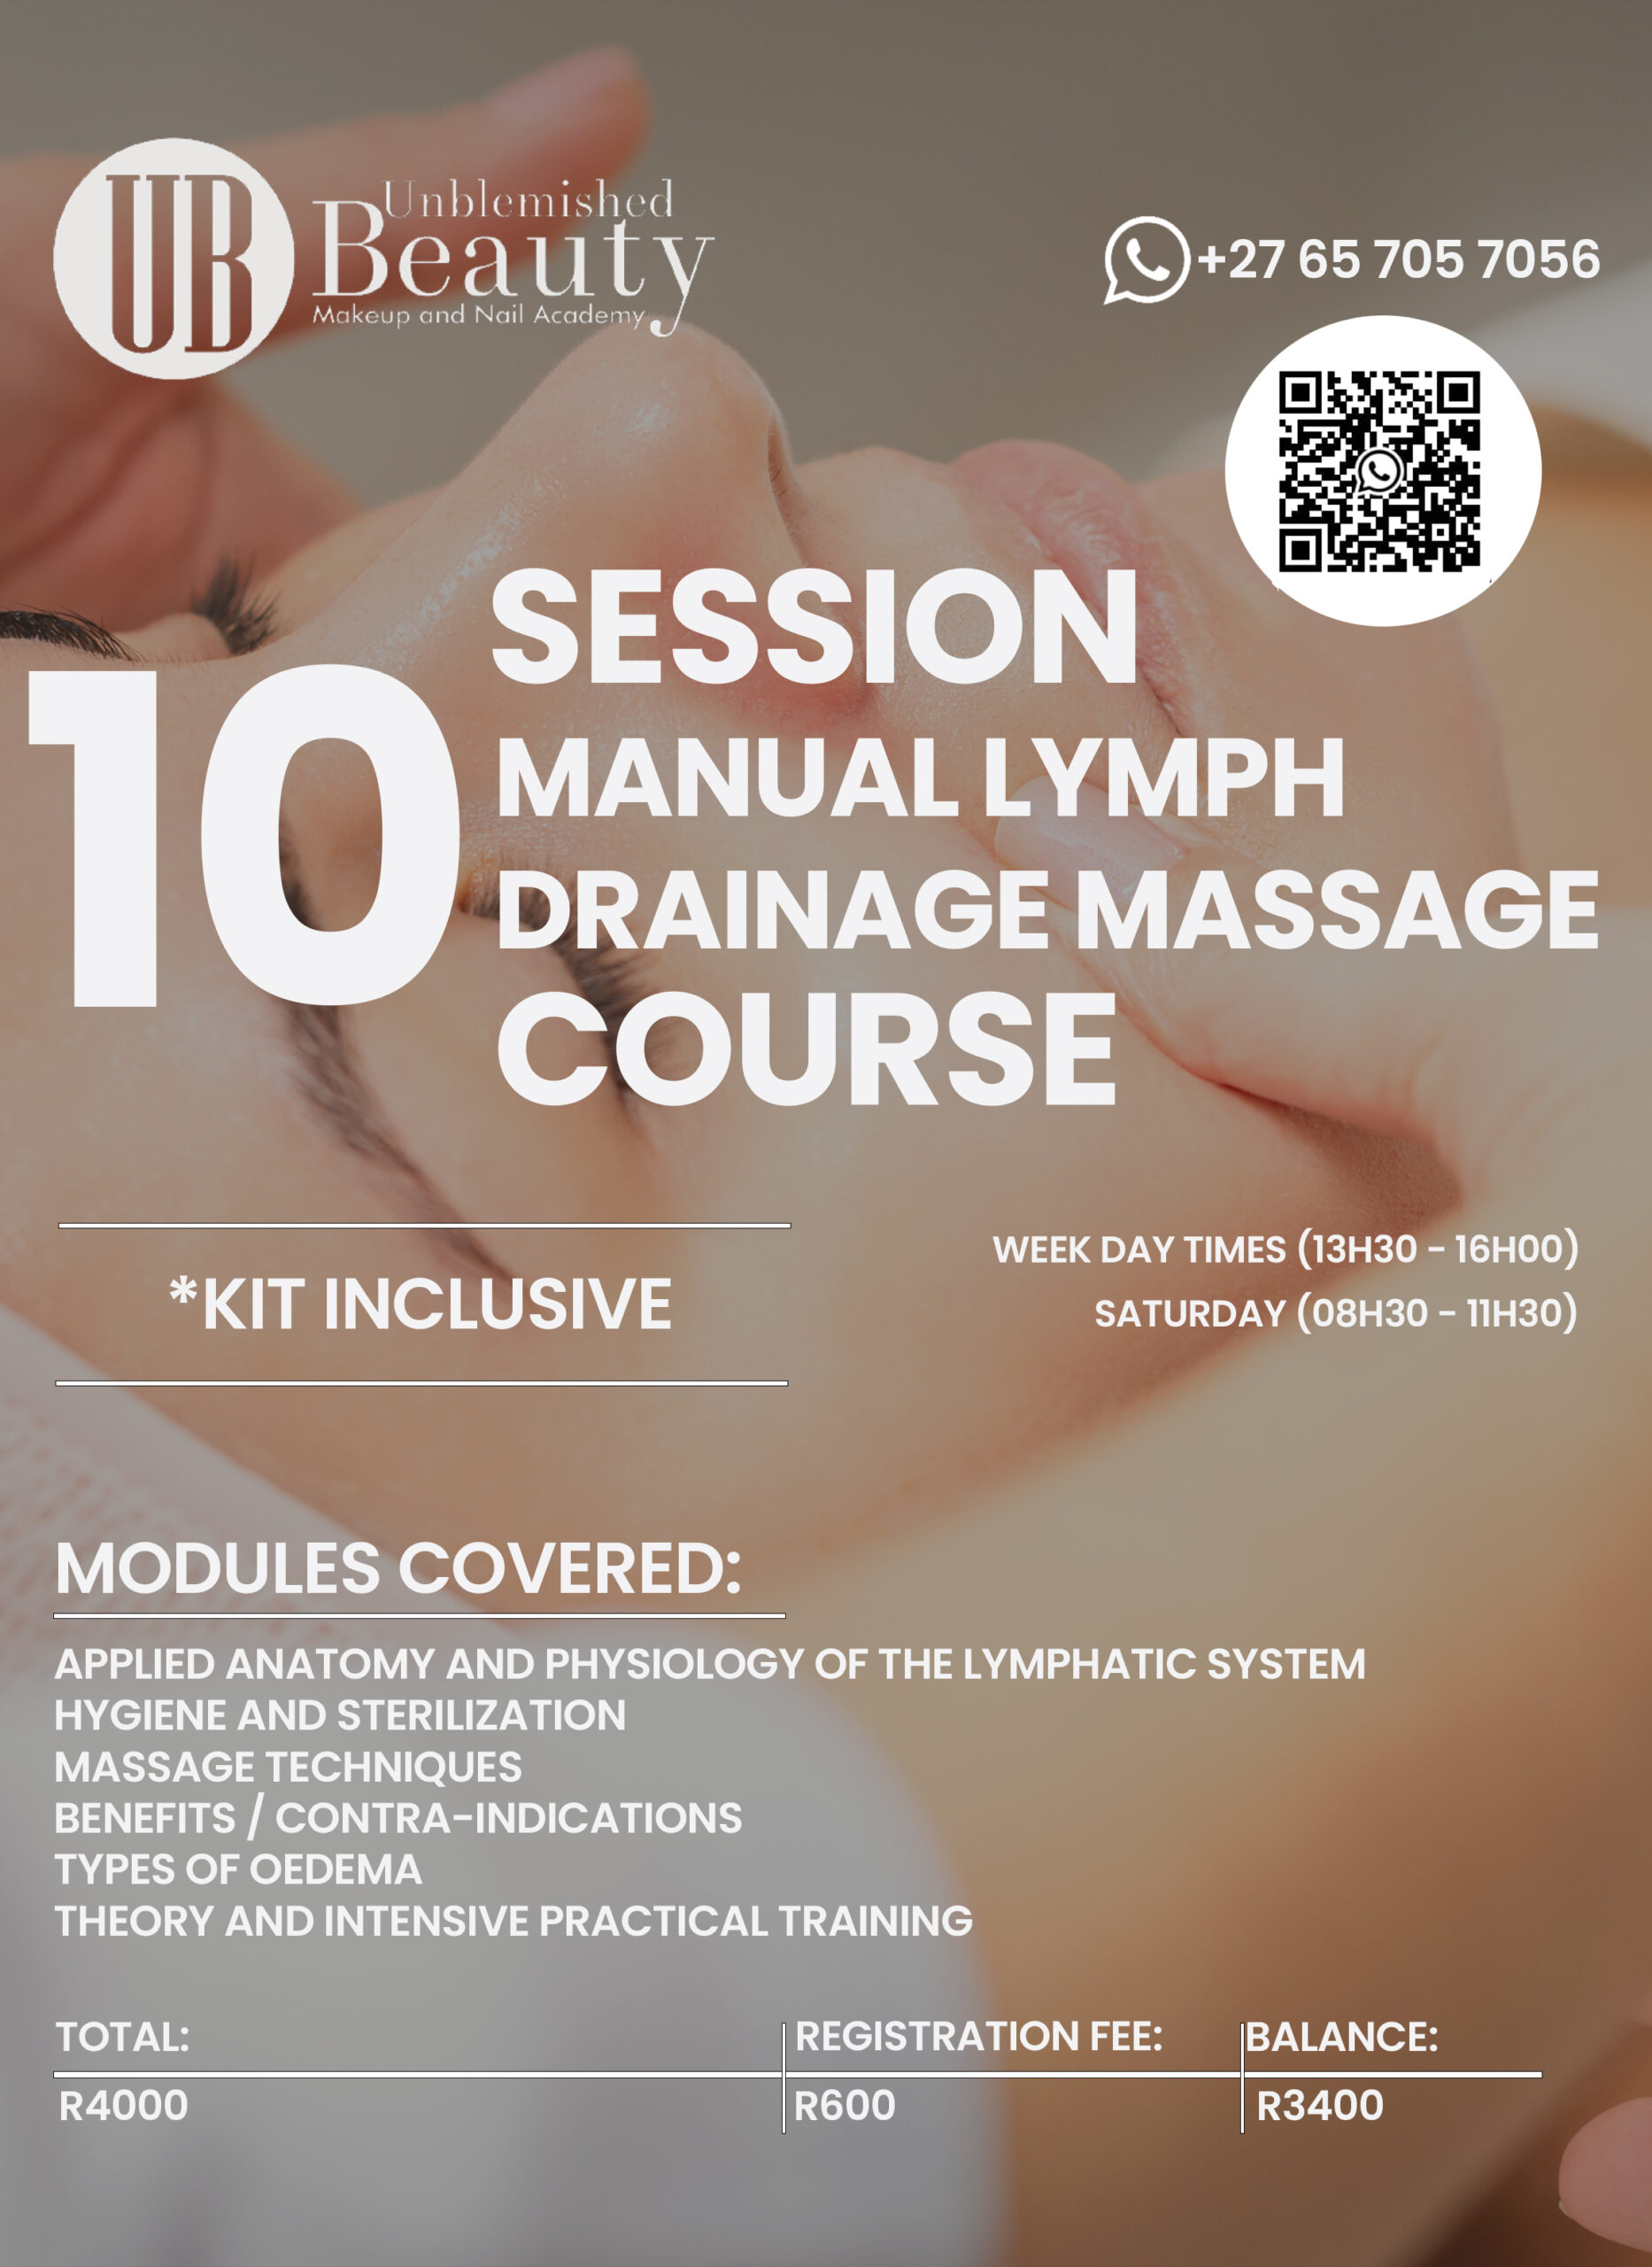 Unblemished Beauty Course Posters- Manual Lymph Drainage Massage 2